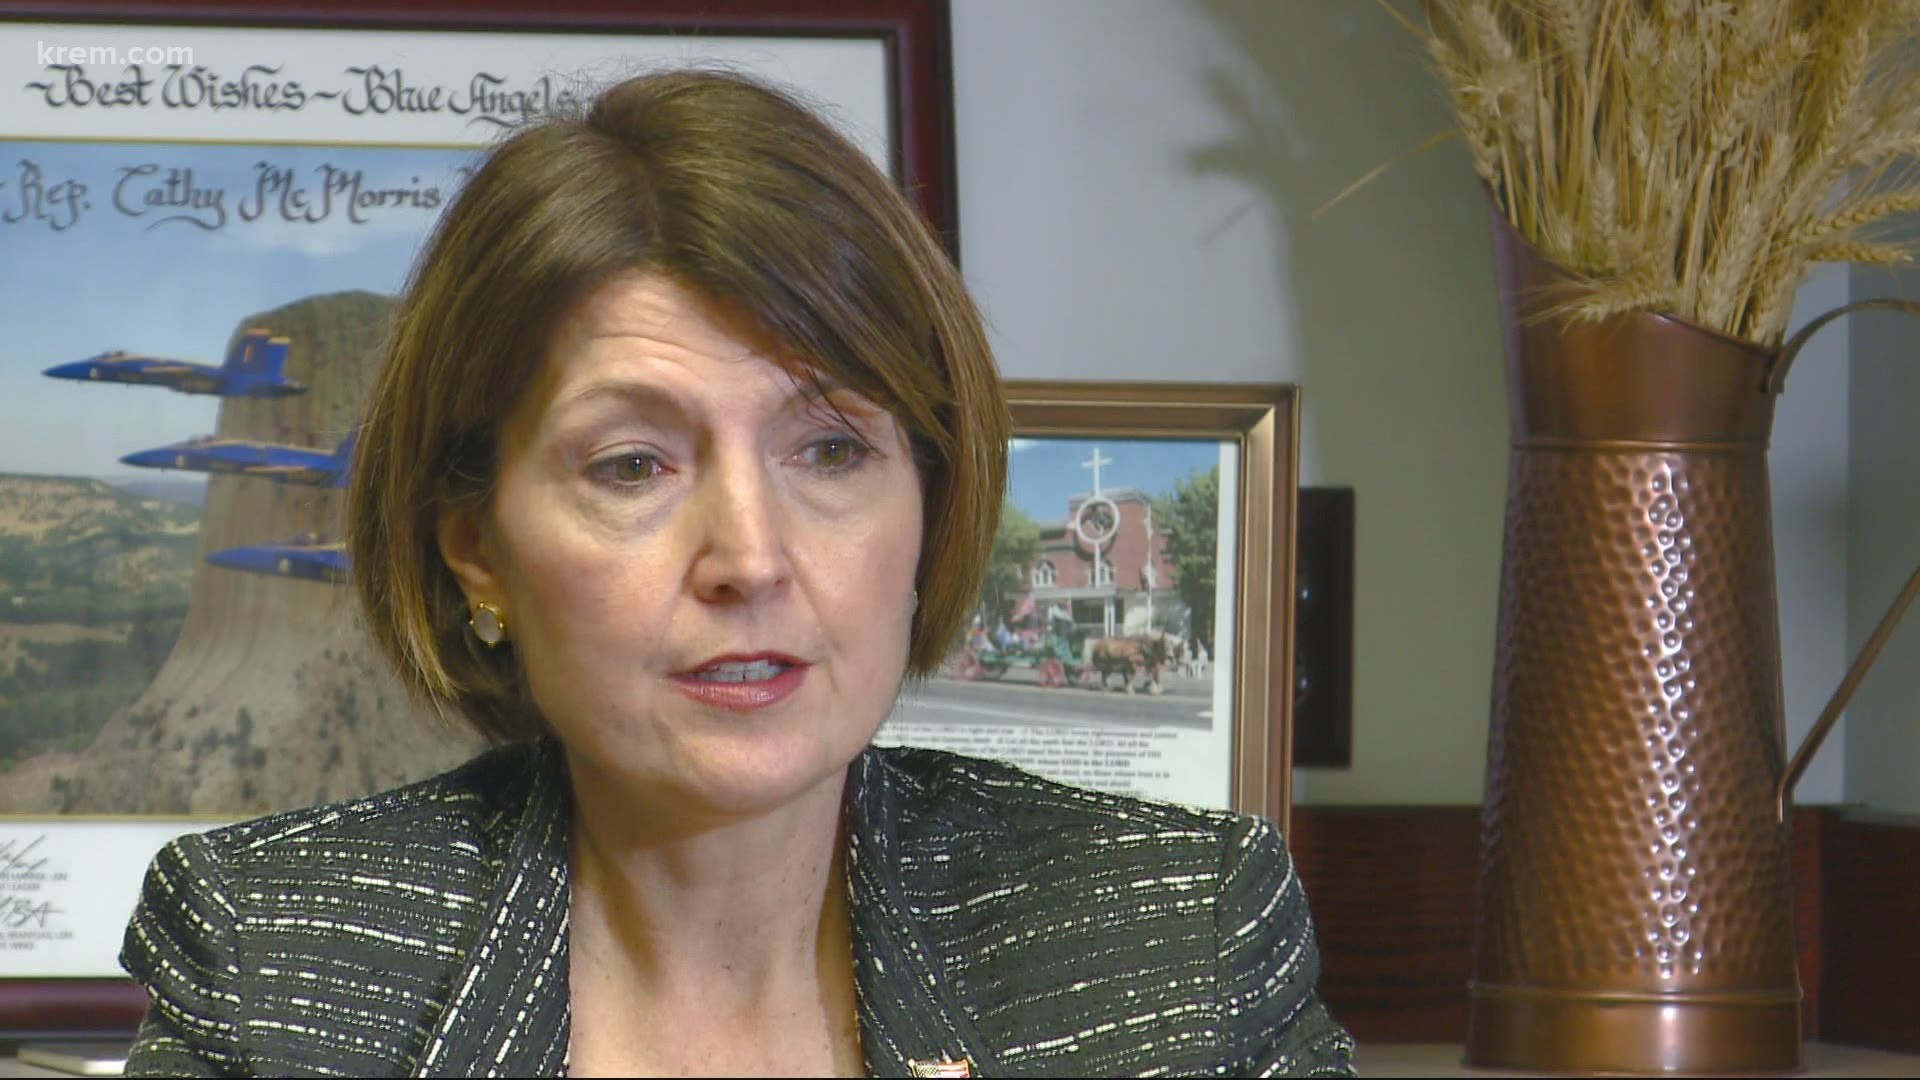 McMorris Rodgers answered questions about what it was like during the Capitol riots, election fraud and the divisiveness in America. Watch the full report at 6 p.m.